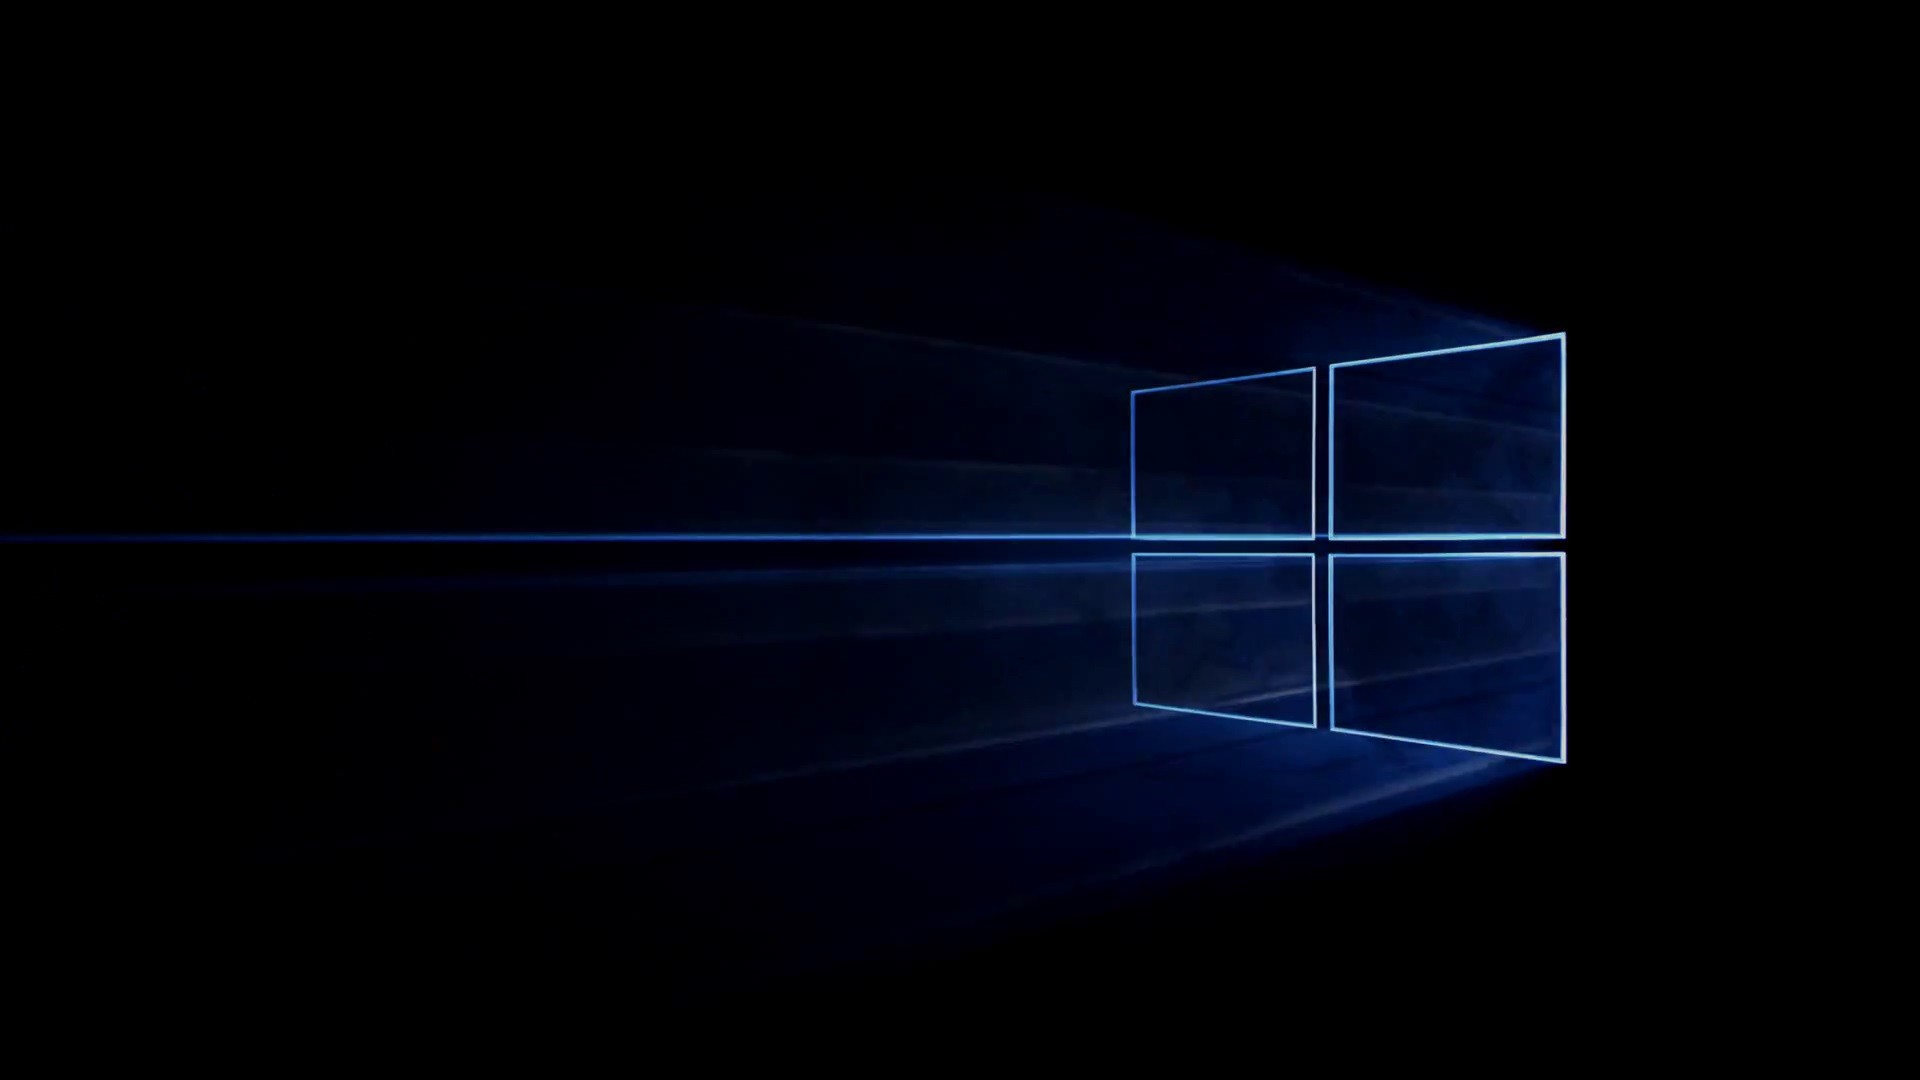 Free download Microsoft Reveals the Official Windows 10 Wallpaper  [1920x1080] for your Desktop, Mobile & Tablet | Explore 43+ Windows 10  Wallpaper 4K Reddit | 4K Wallpaper Windows 10, Reddit 4K Wallpaper, Reddit  4K Wallpapers